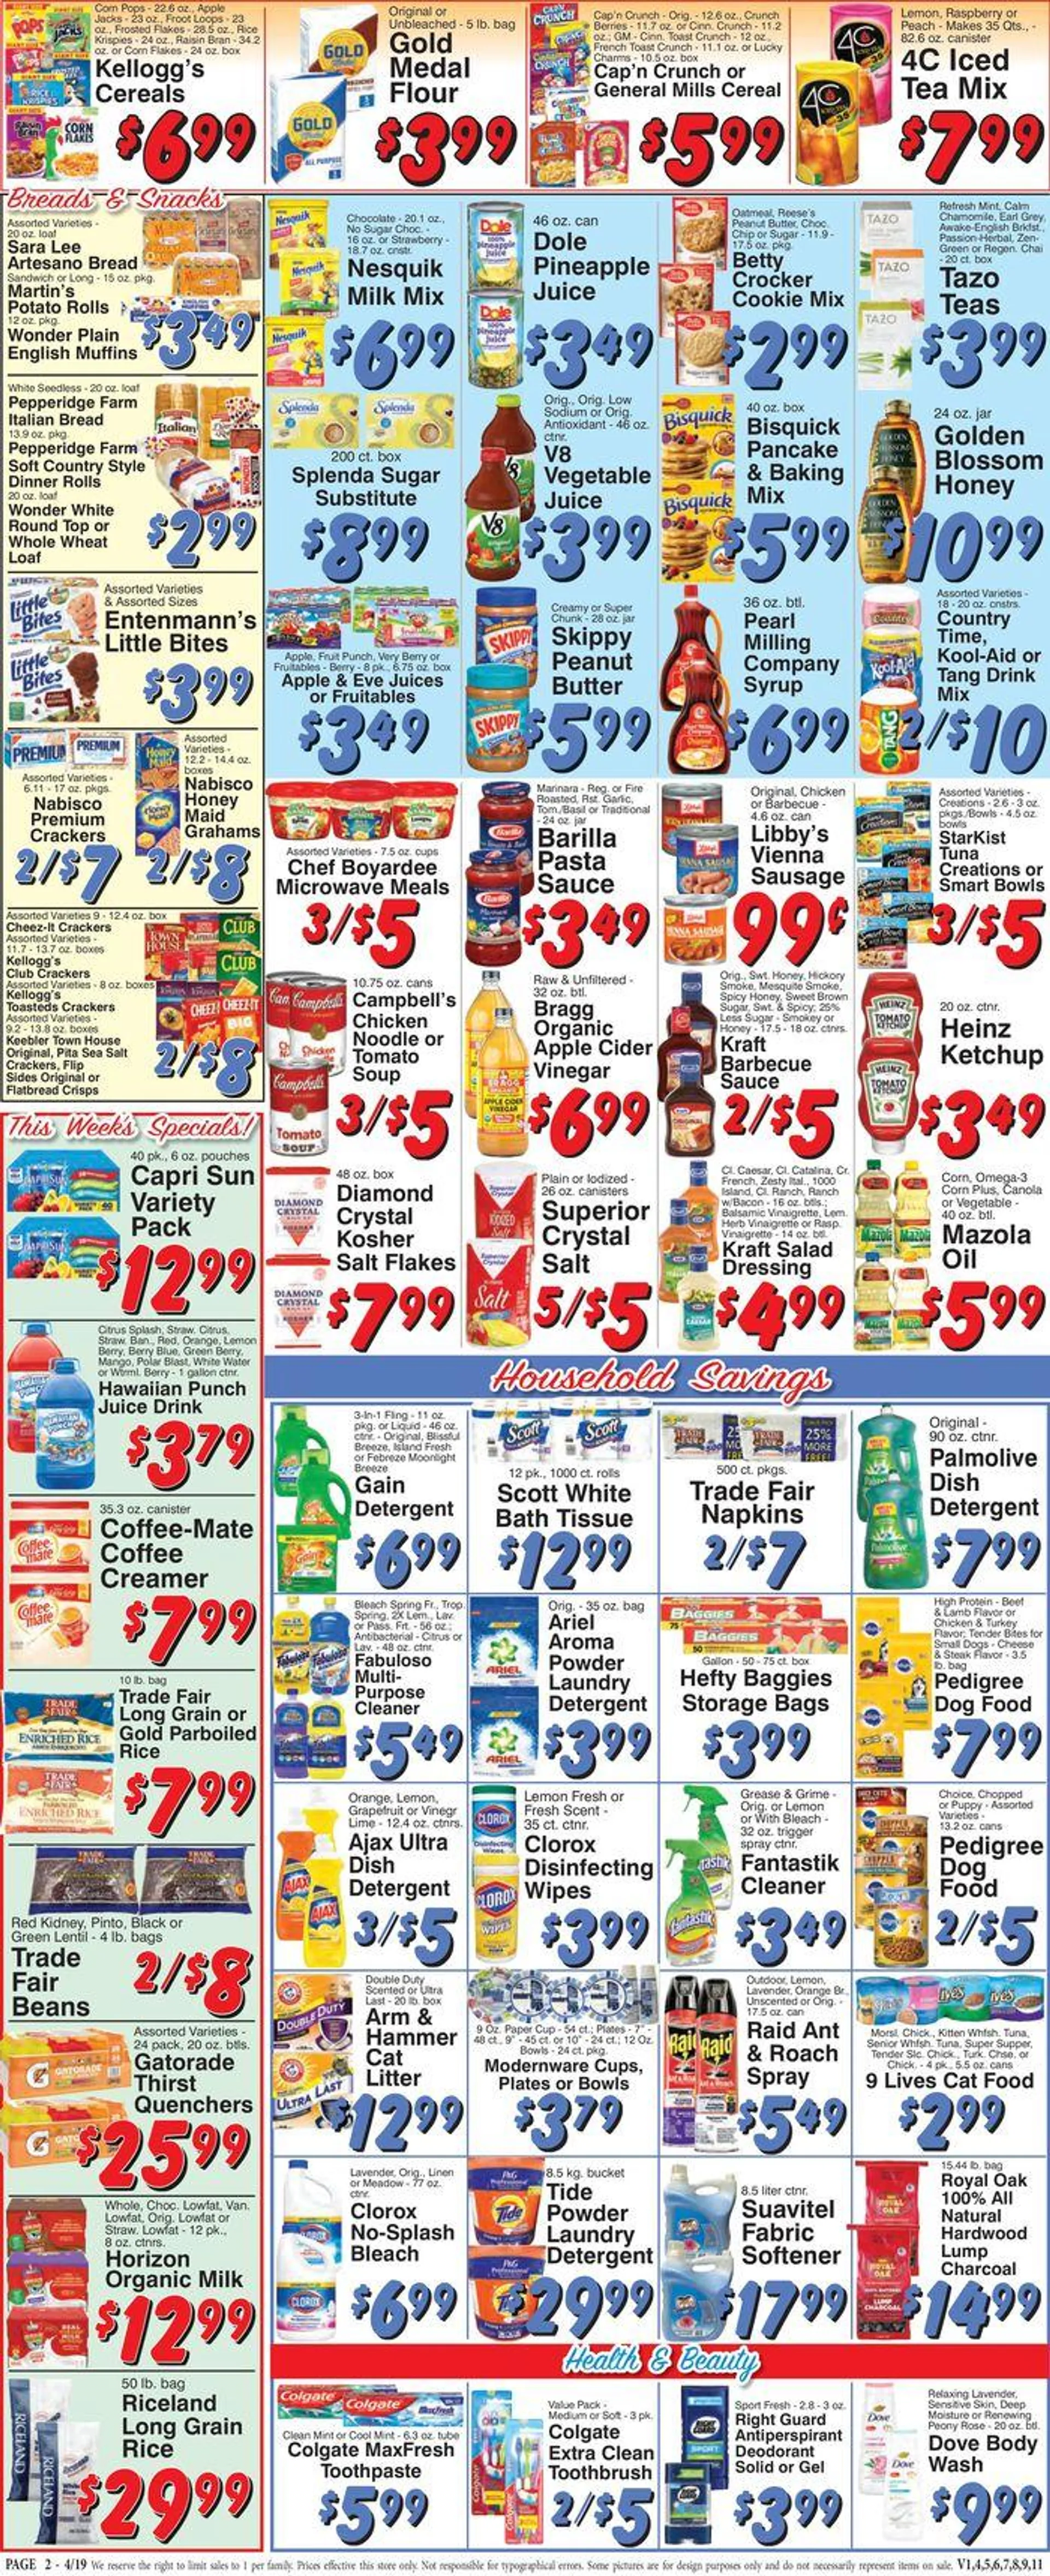 Fill Your Pantry With Savings - 2